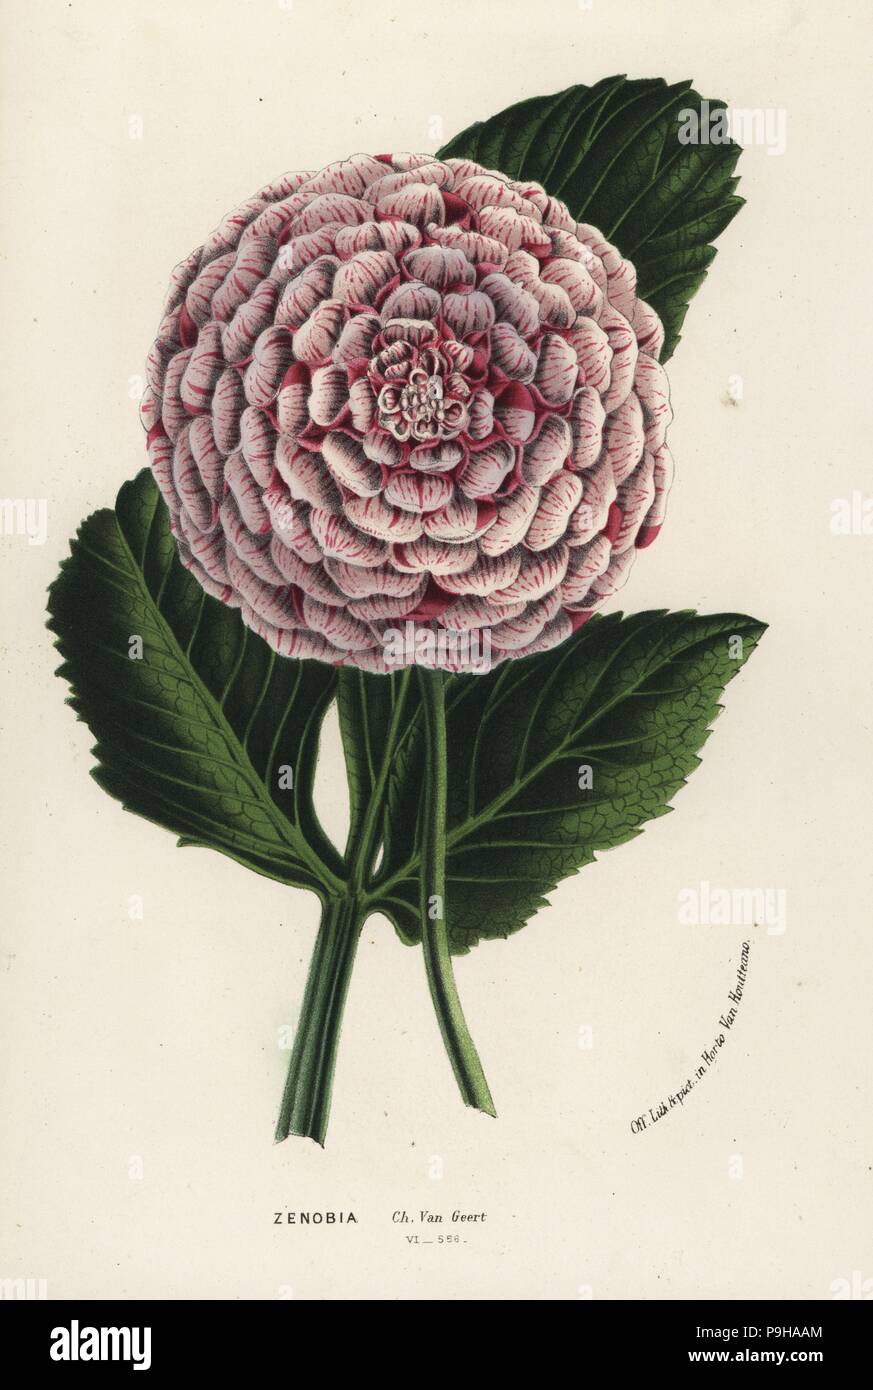 Zenobia dahlia hybrid, Dahlia coccinea. Handcoloured lithograph from Louis van Houtte and Charles Lemaire's Flowers of the Gardens and Hothouses of Europe, Flore des Serres et des Jardins de l'Europe, Ghent, Belgium, 1867-1868. Stock Photo